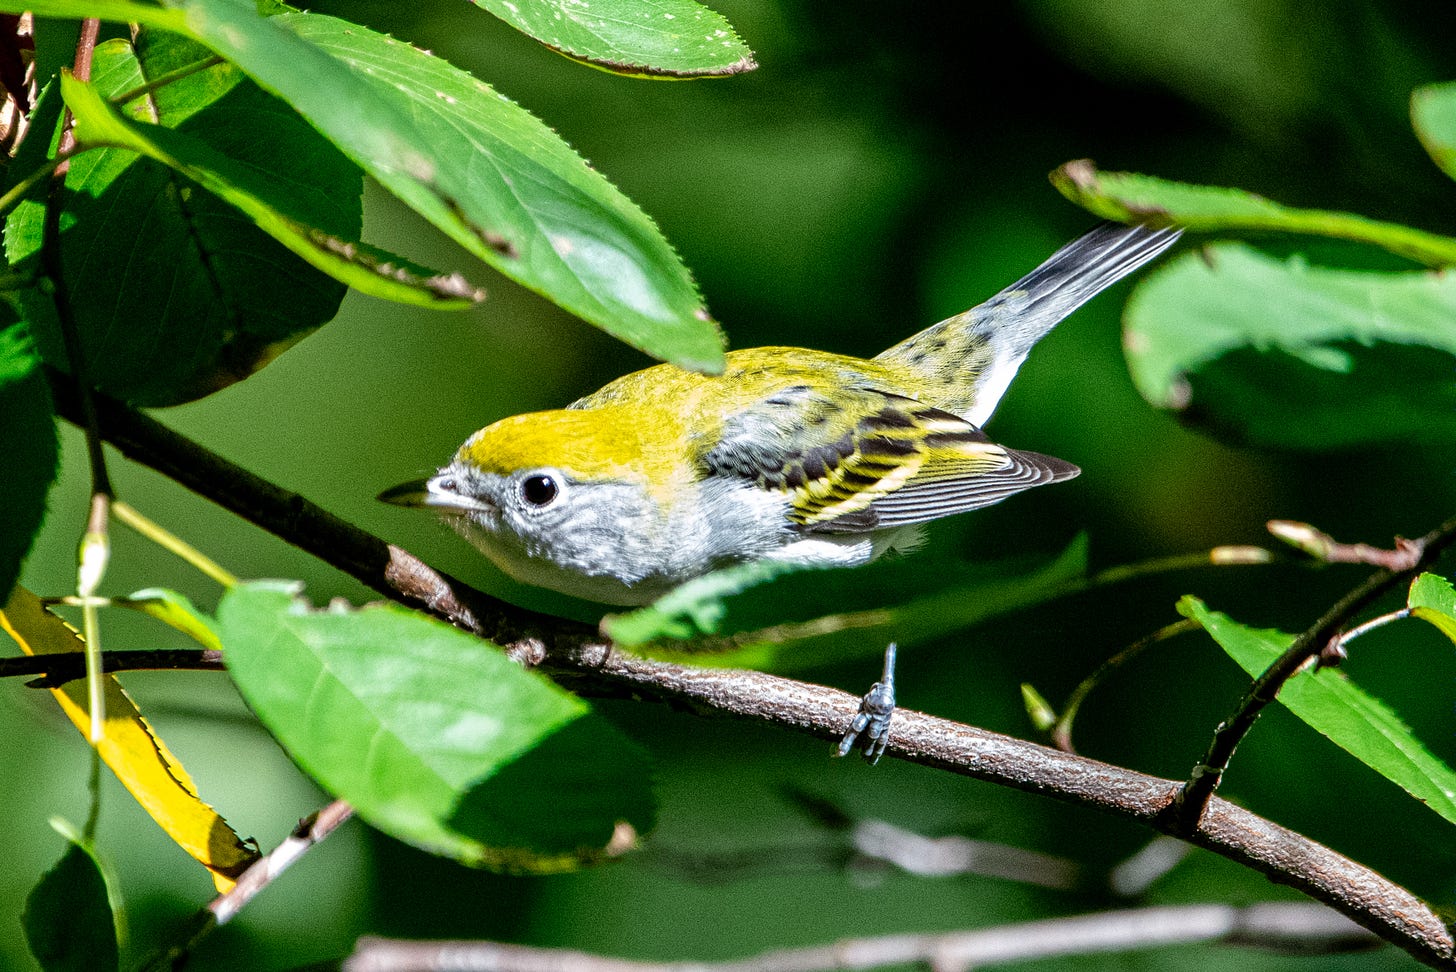 A chestnut-sided warbler, a small bird with a bright lime-green cap and back and a gray neck, leans forward, ducking its head